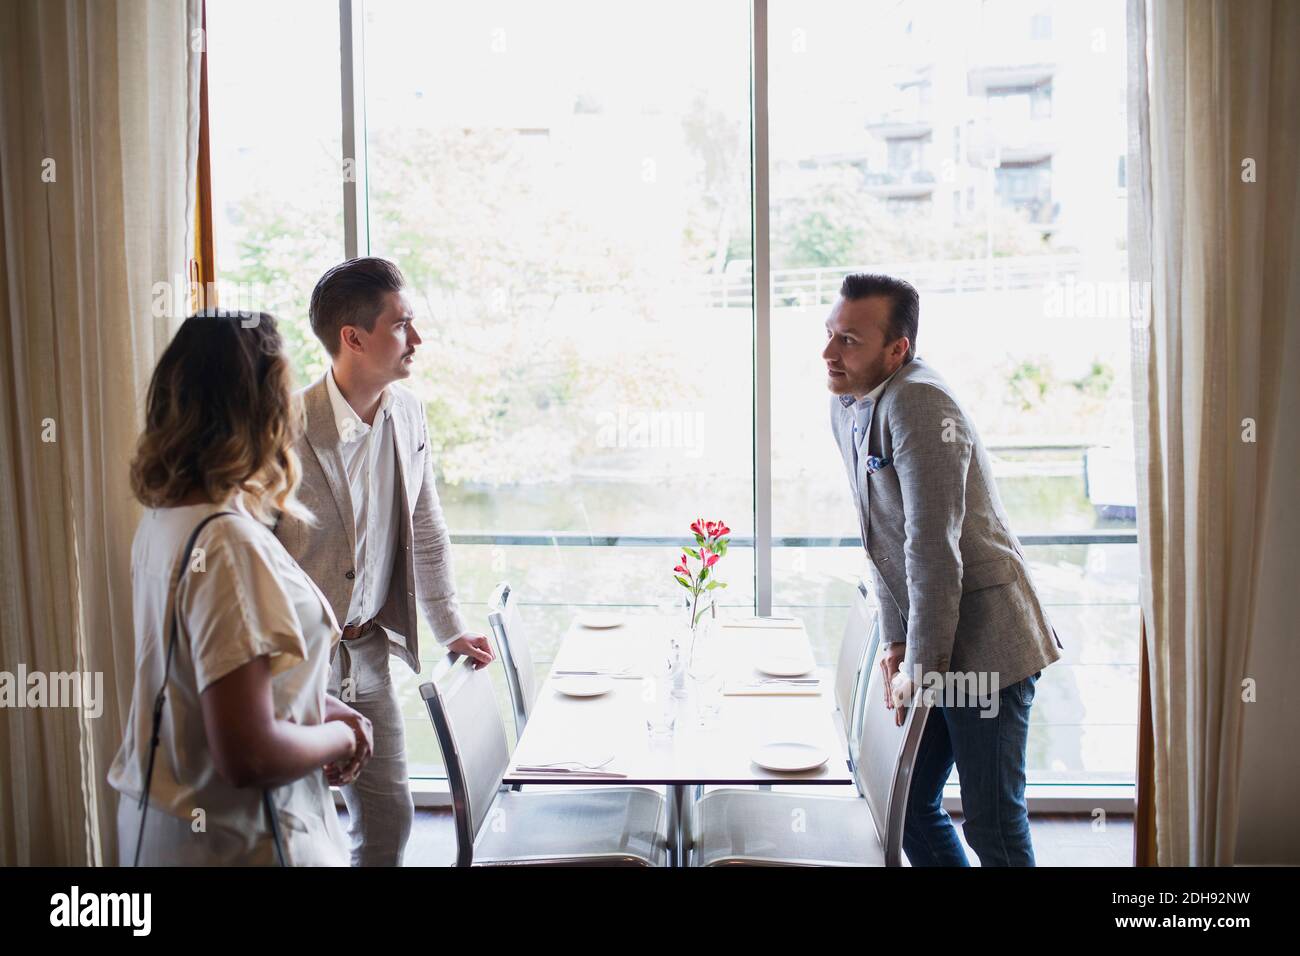 Business people standing by table against window at restaurant Stock Photo